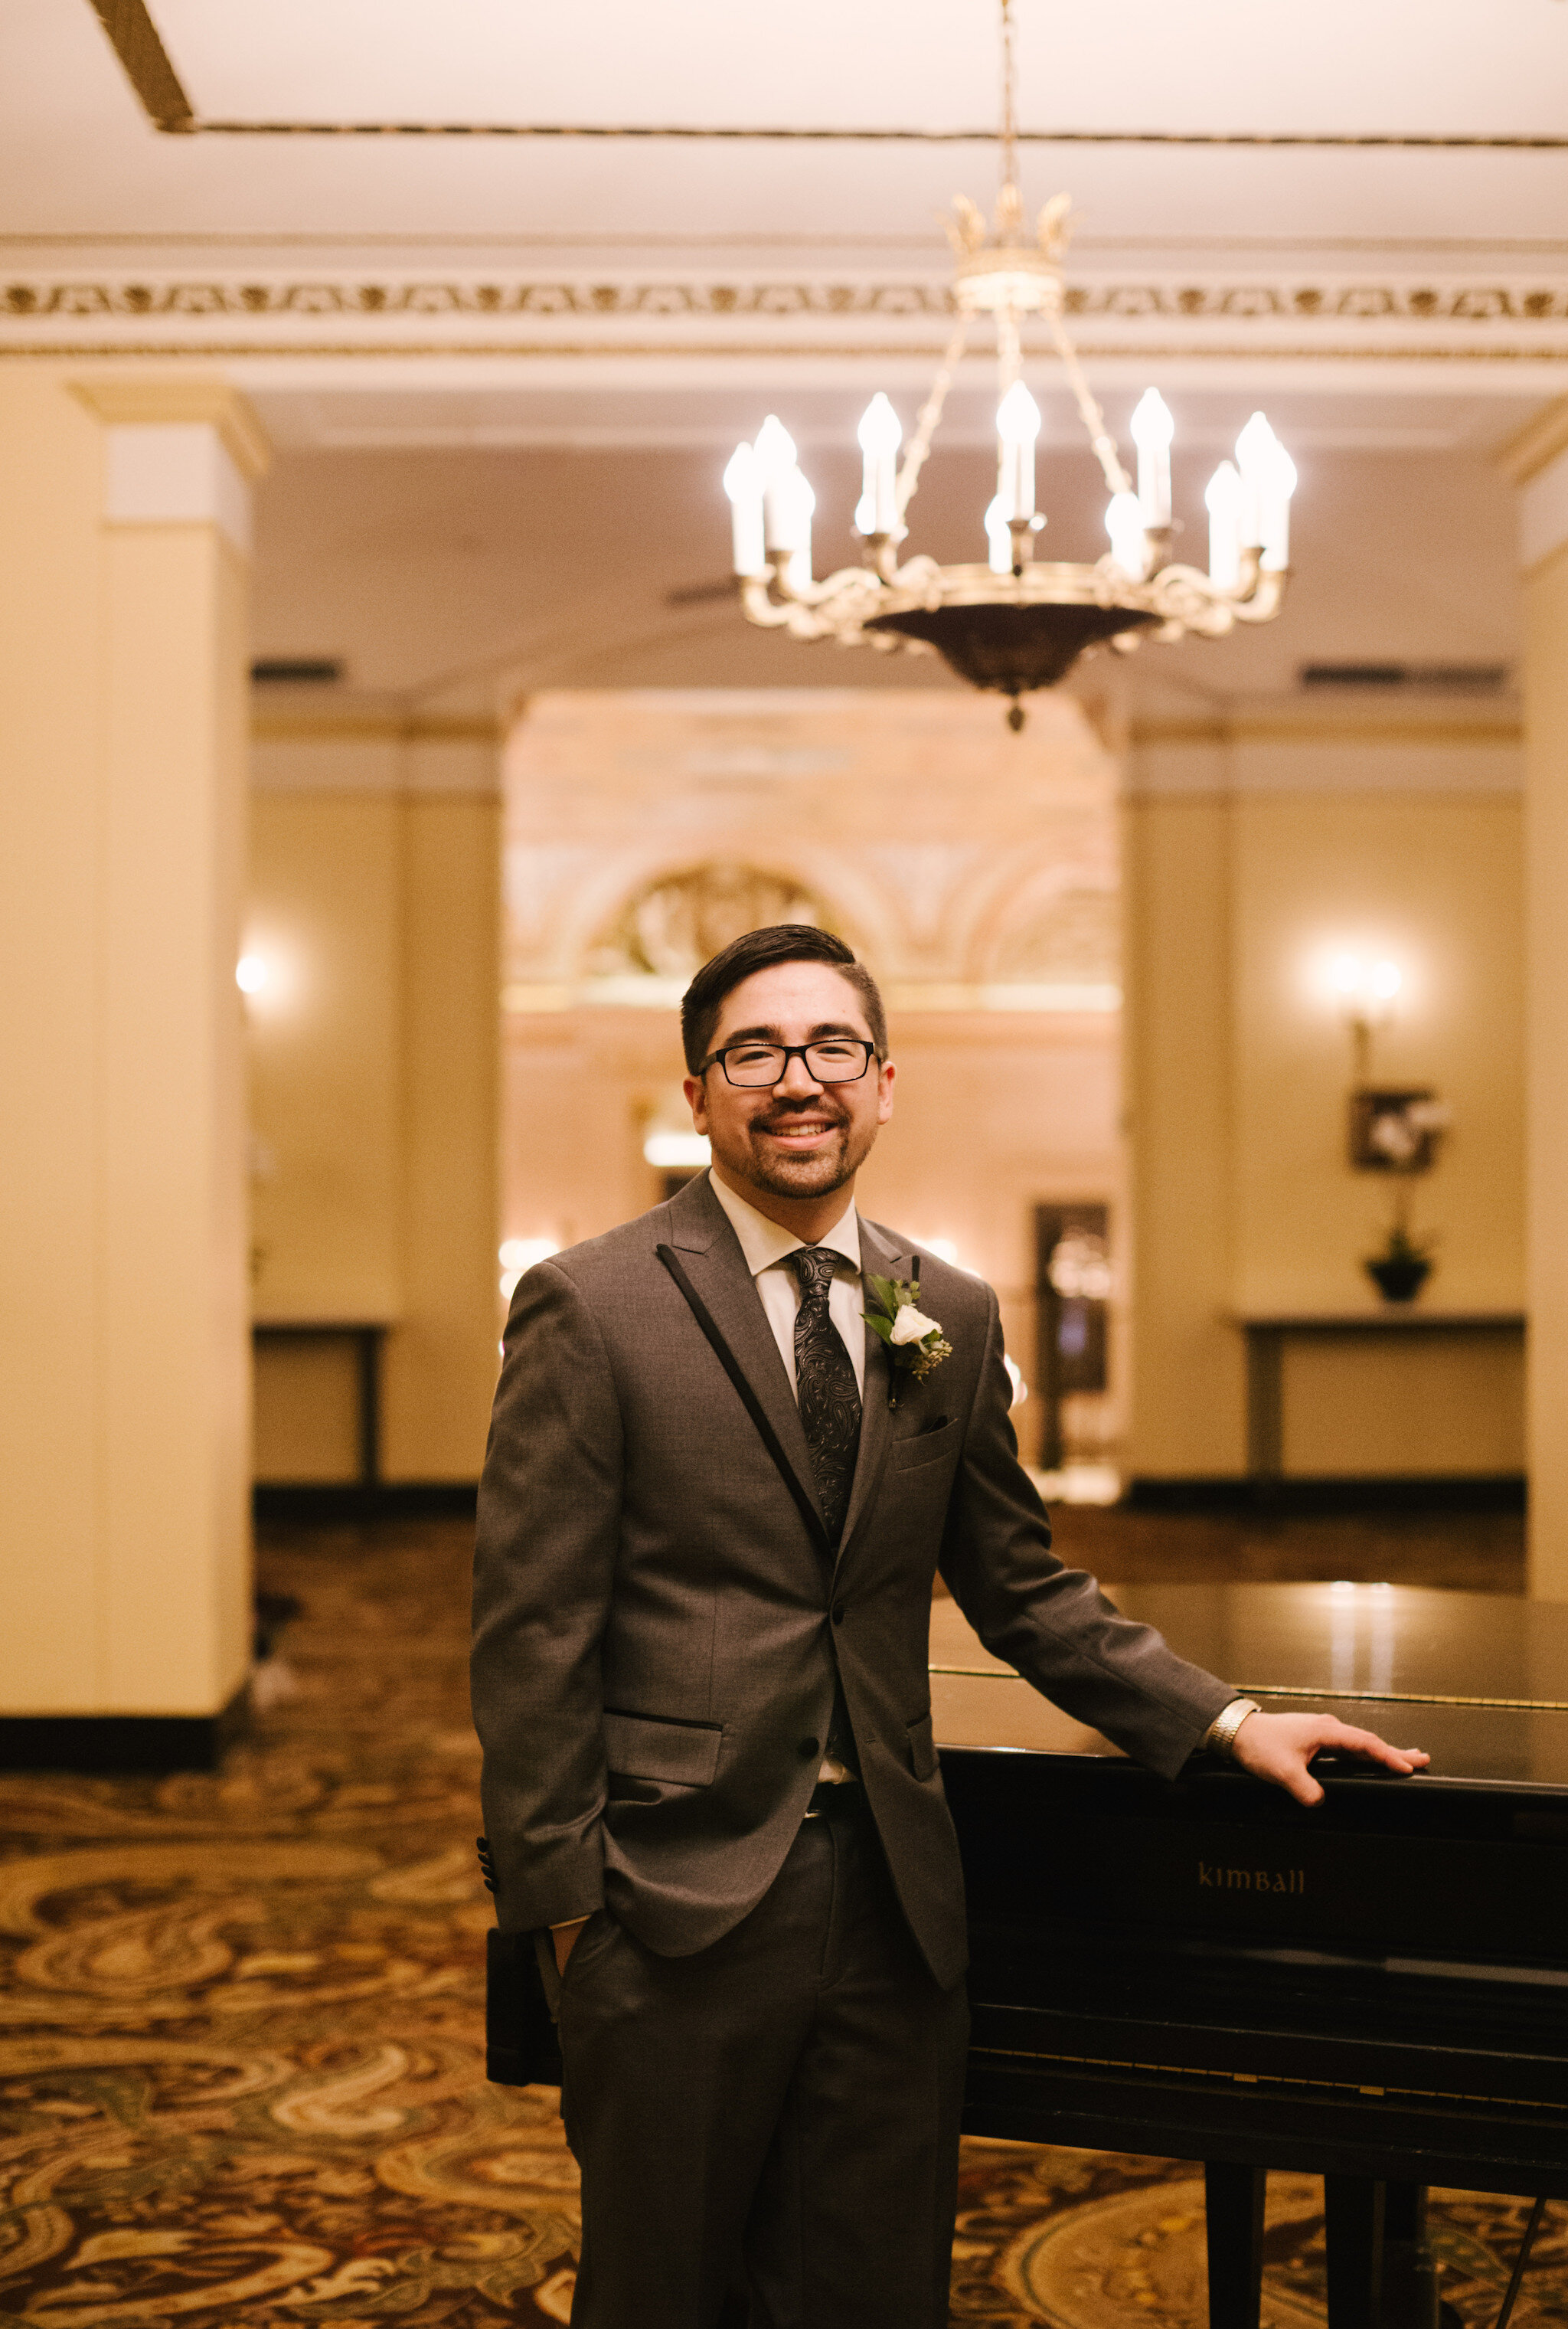 Grooms Portrait: Elegant Jewel-Toned Wedding captured by Dorey Kronick featured on CHI thee WED